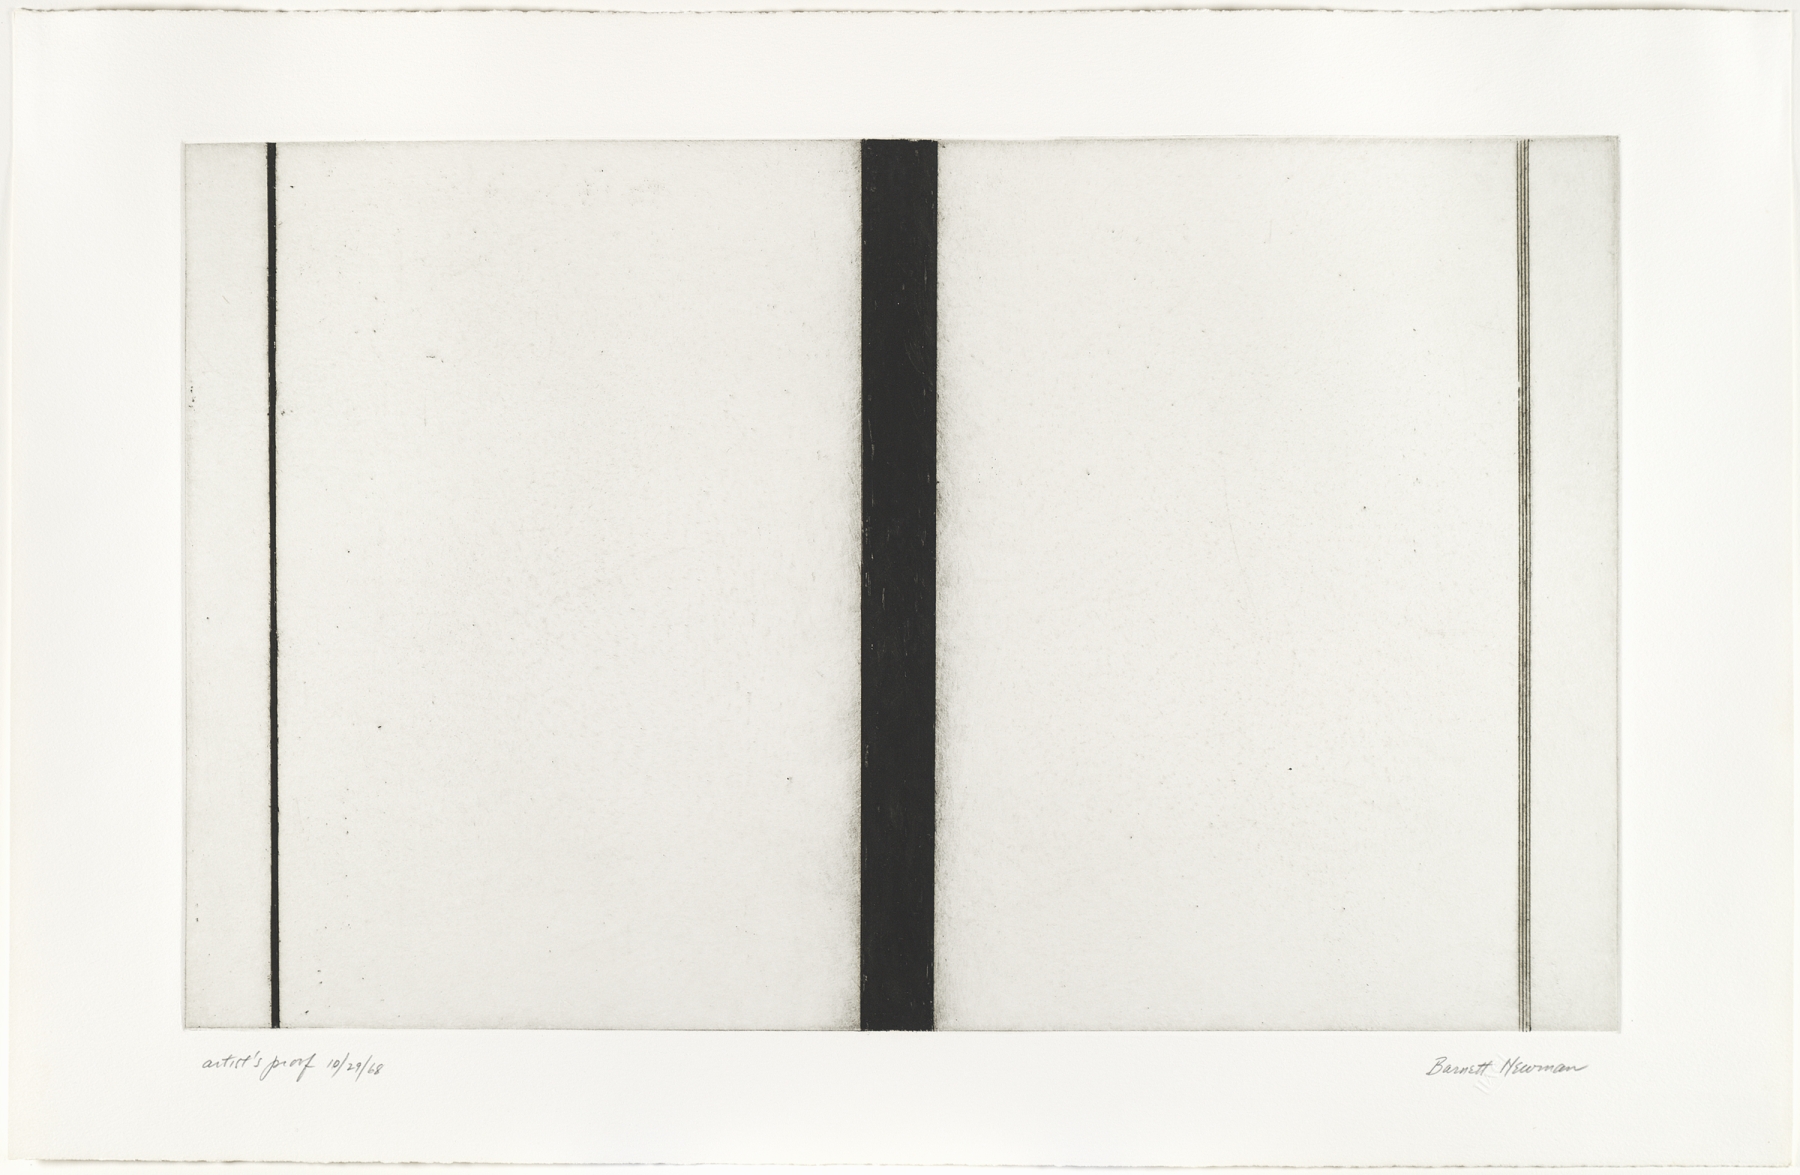 Barnett Newman,&nbsp;Untitled Etching #1, 1968.&nbsp;

Etching and aquatint, 14 15/16 x 23 7/8 inches, image;&nbsp;19 3/16 x 29 3/4 inches, sheet.&nbsp;

AP aside from the edition of 27&nbsp;

Private Collection&nbsp;